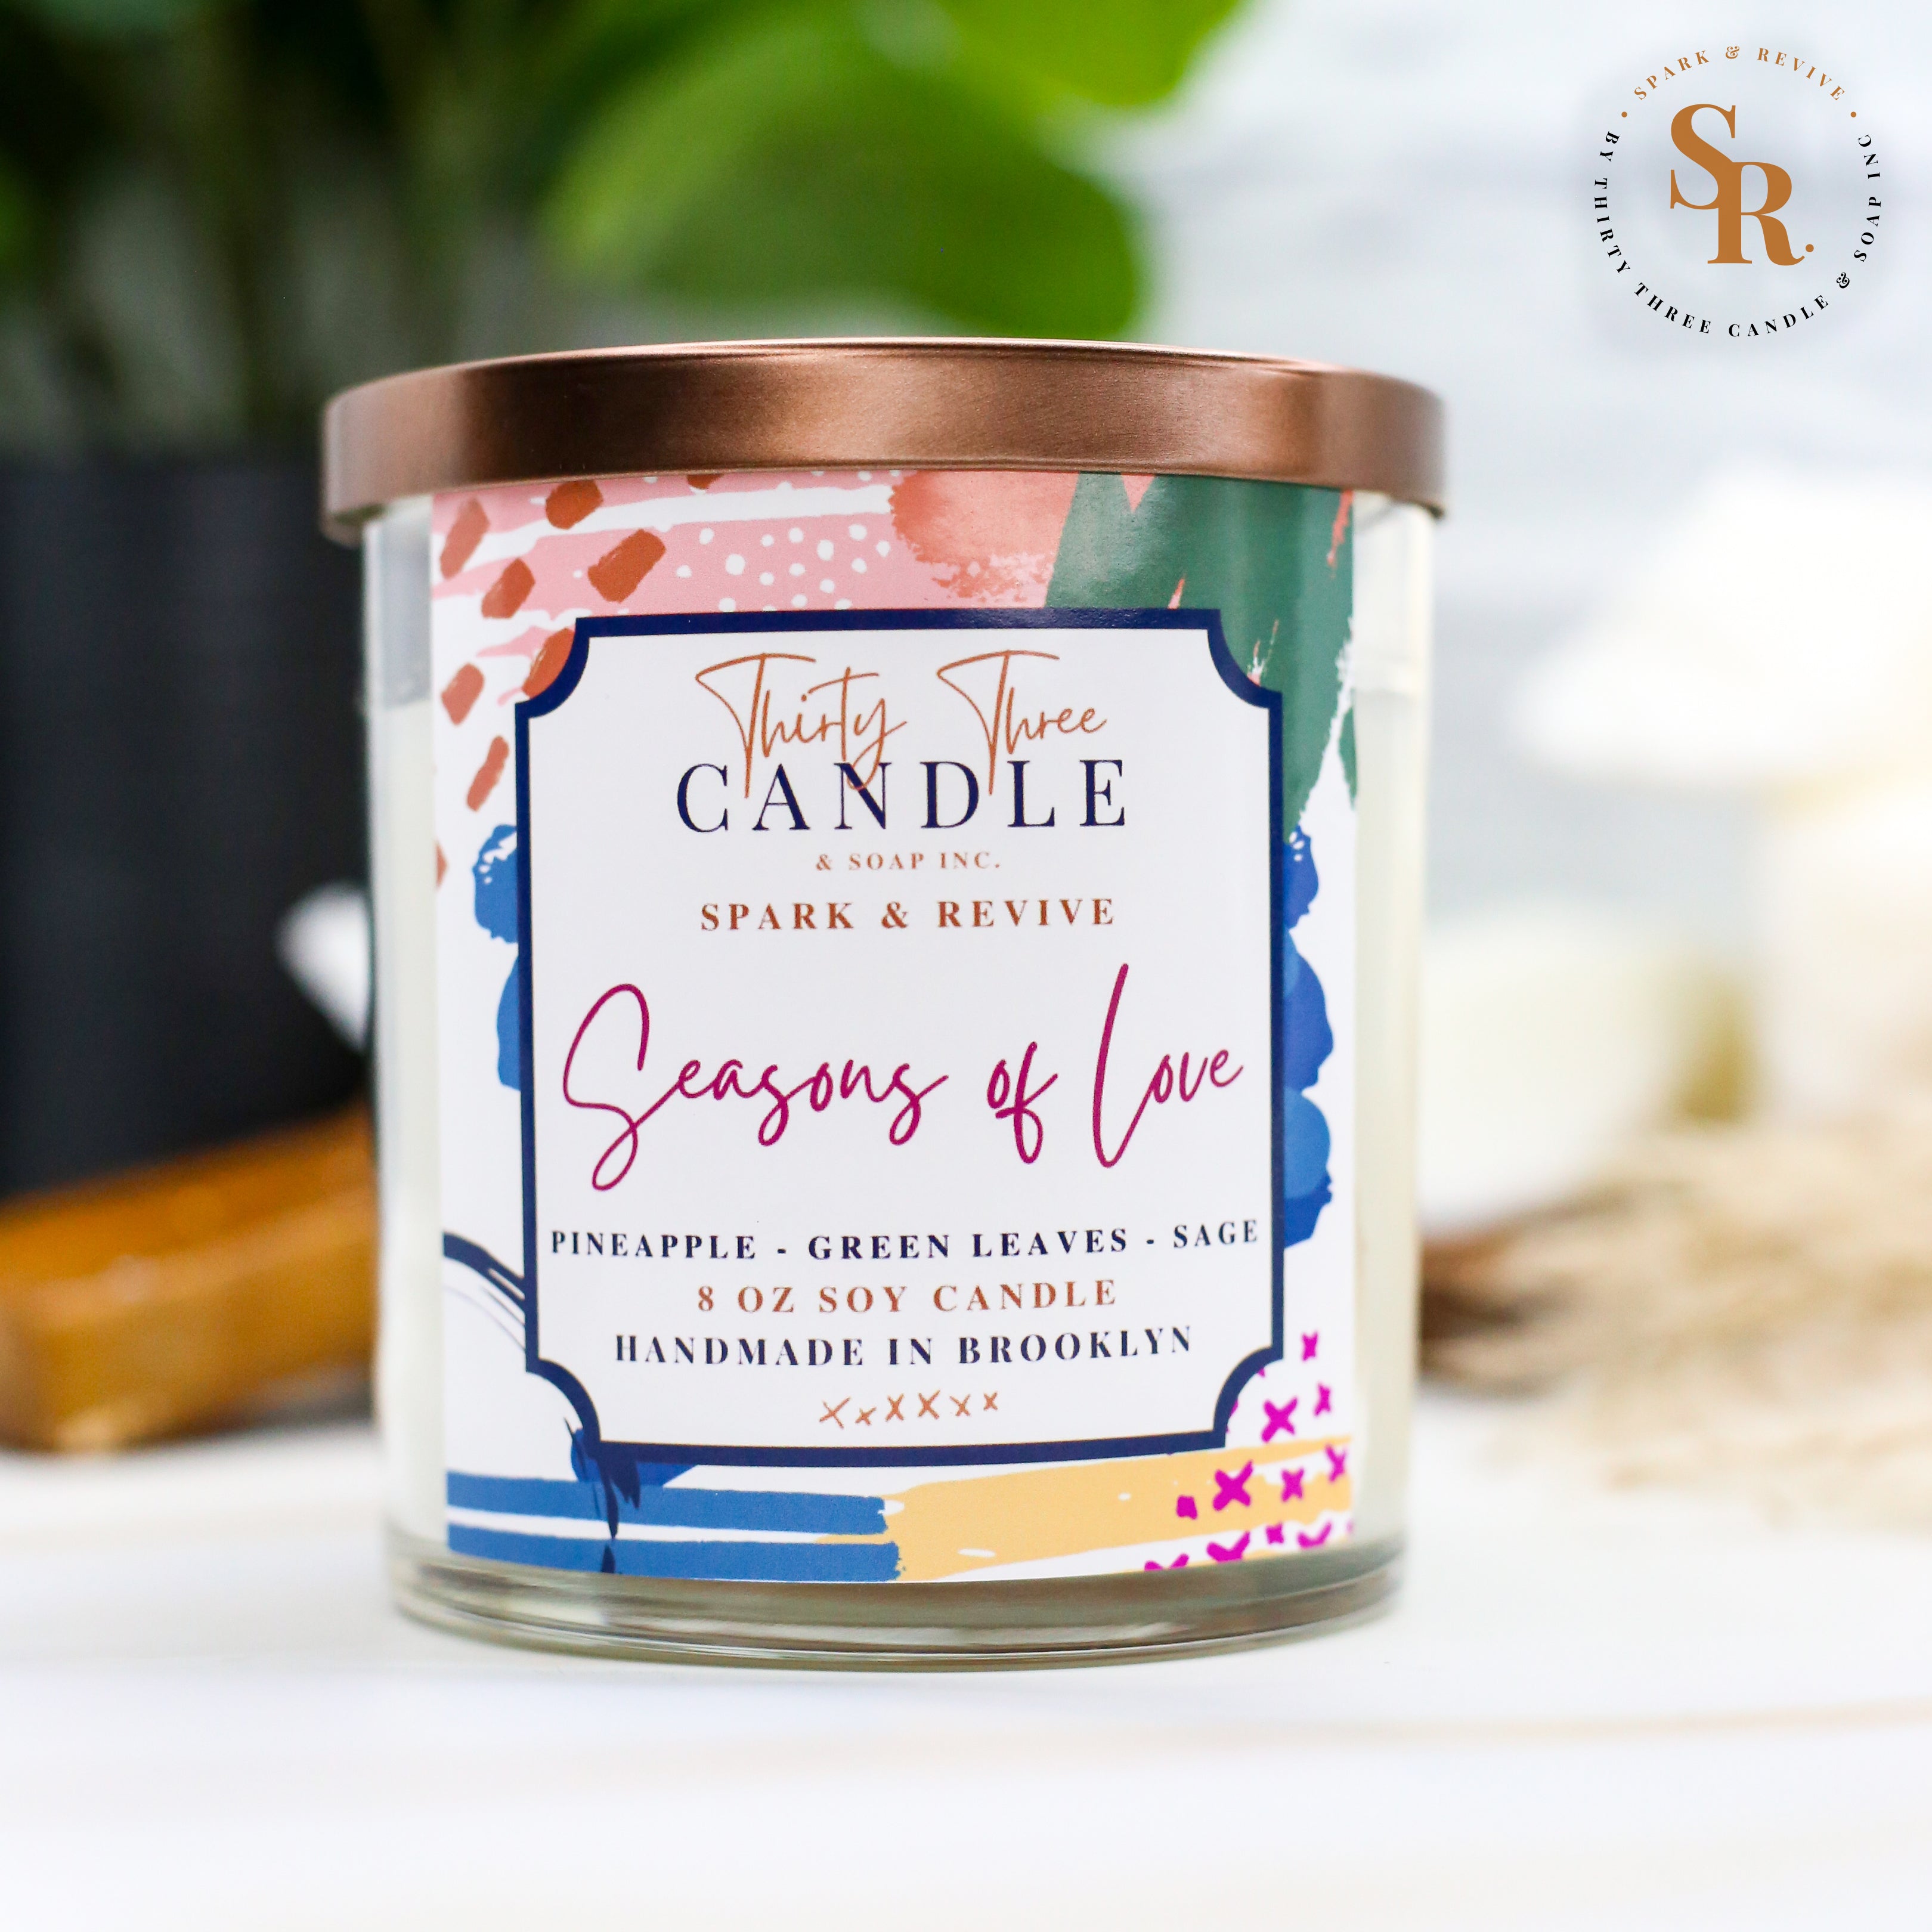 Uplift your mood and awaken your senses with our Seasons of Love scented soy candle. Seasons of Love is a sweet but not overwhelming blend of pineapple, sage, and green leaves. It is sure to put you in good spirits and bring love to your day.  Seasons of Love is infused with natural essential oils, including eucalyptus, cedar, vetiver, palmarosa, clary sage, lemongrass, amyris, black pepper, cade, and blue chamomile flower. @SparkandRevive